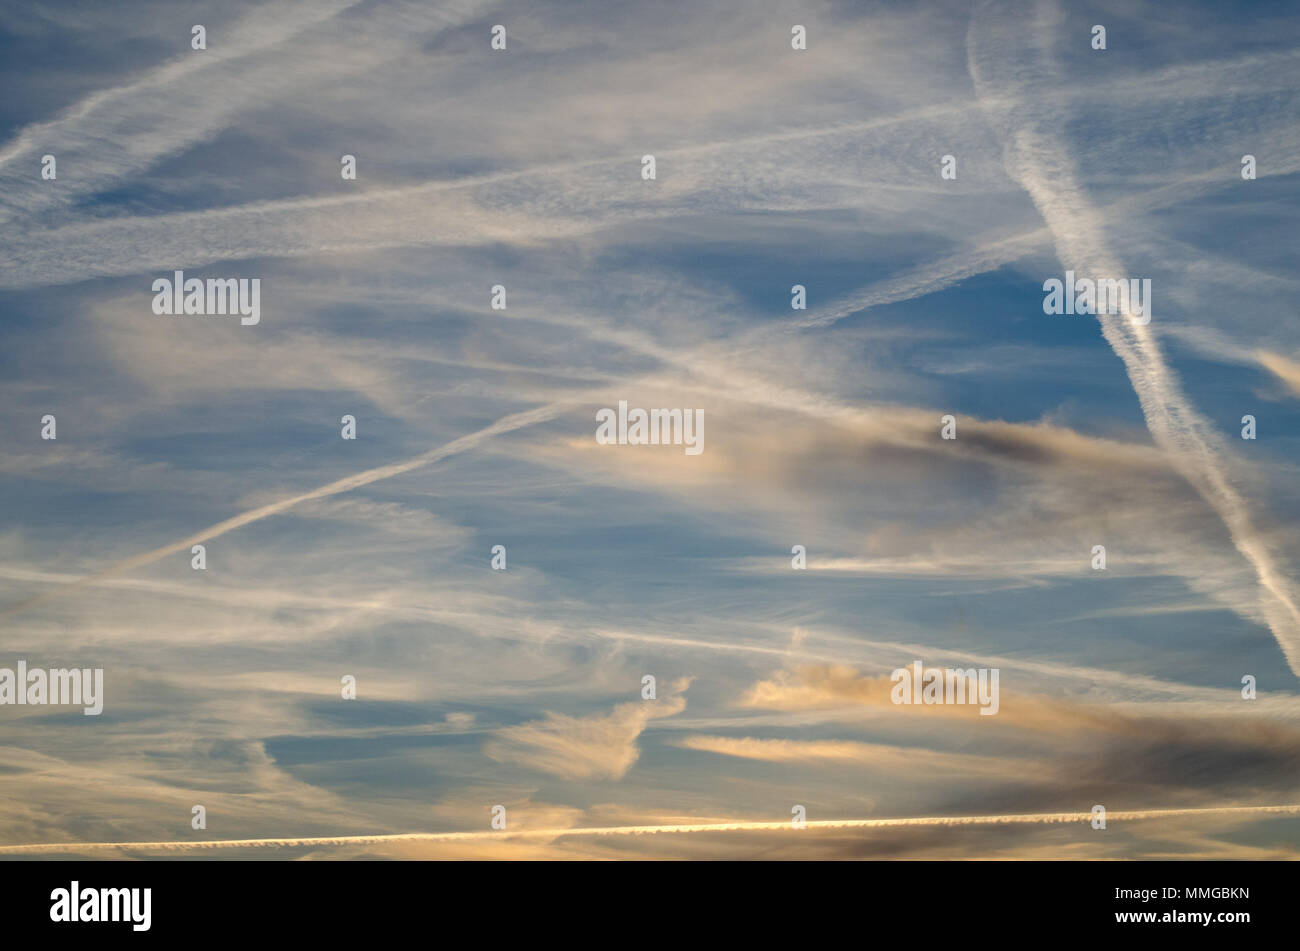 Blue sky with airplane trails and lines Stock Photo